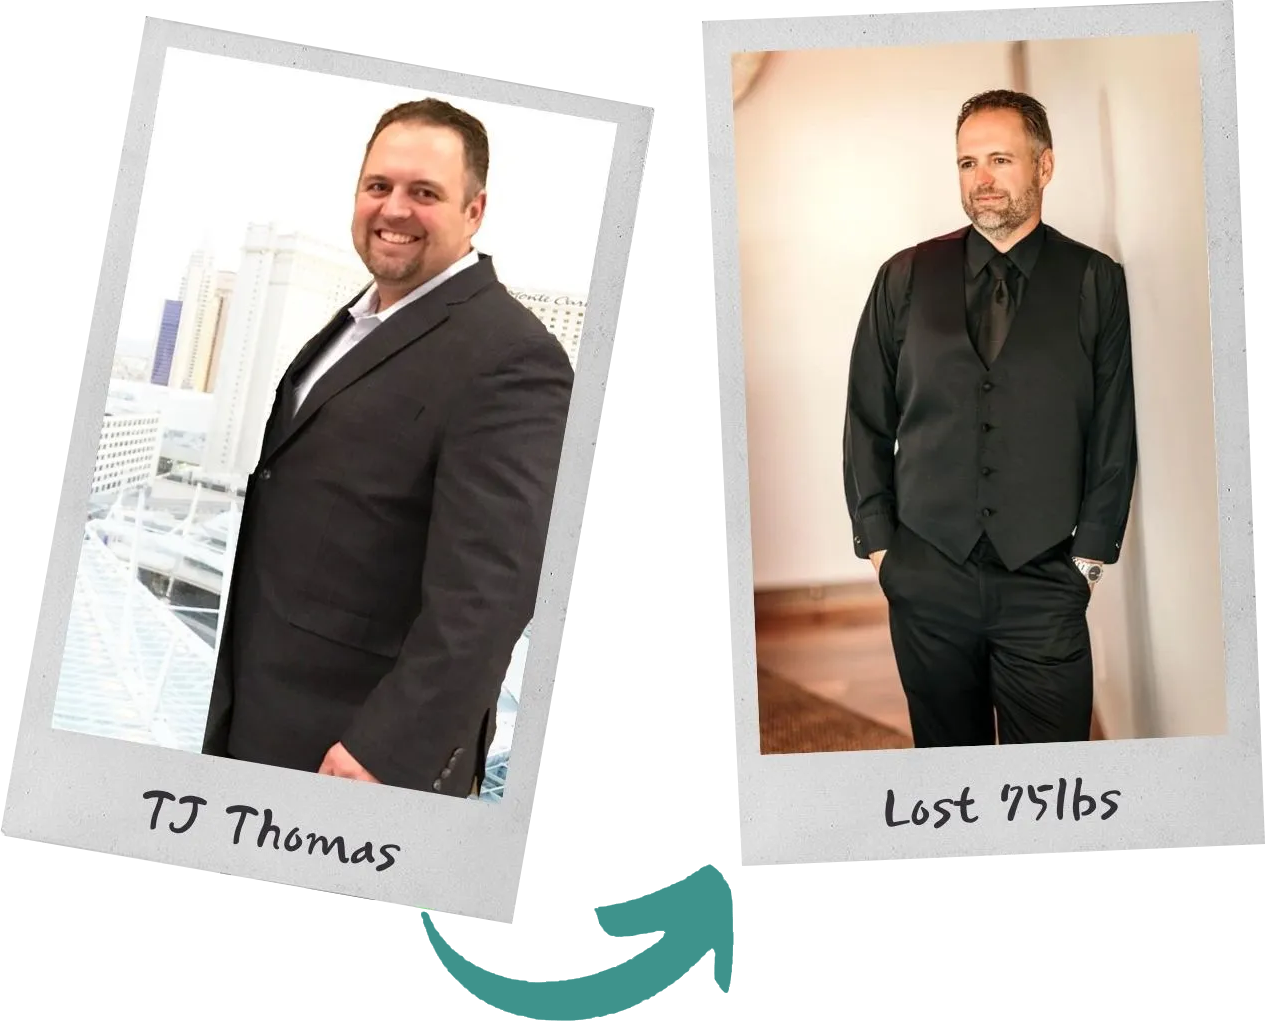 a man in a suit has lost 75 lbs